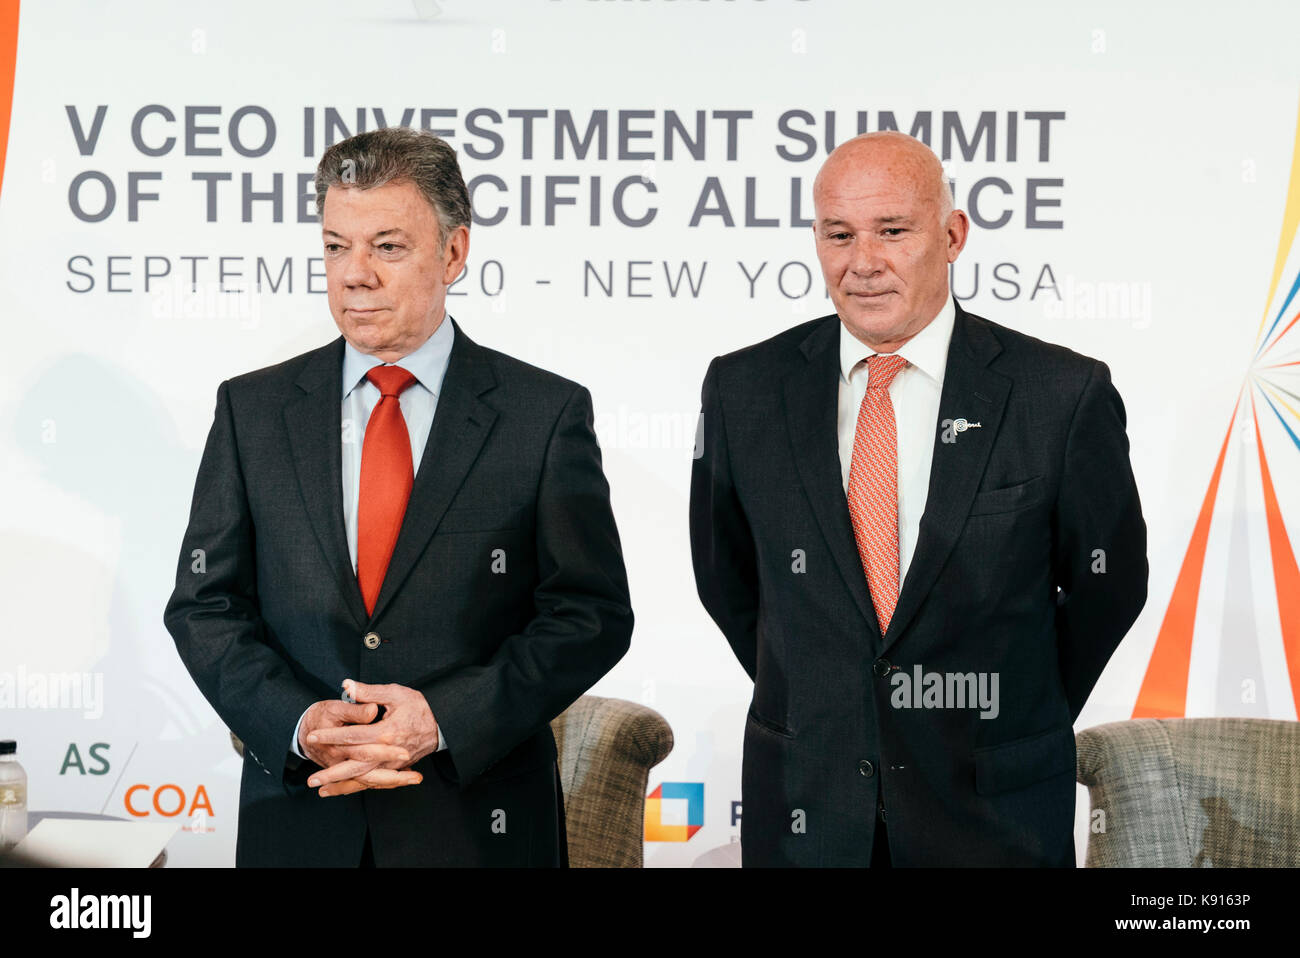 Colombia President Juan Manuel Santos  and Trade Minister Eduardo Ferreyros from Peru speakers at the CEO Investment Summit of The Pacific Alliance during UNGA Stock Photo